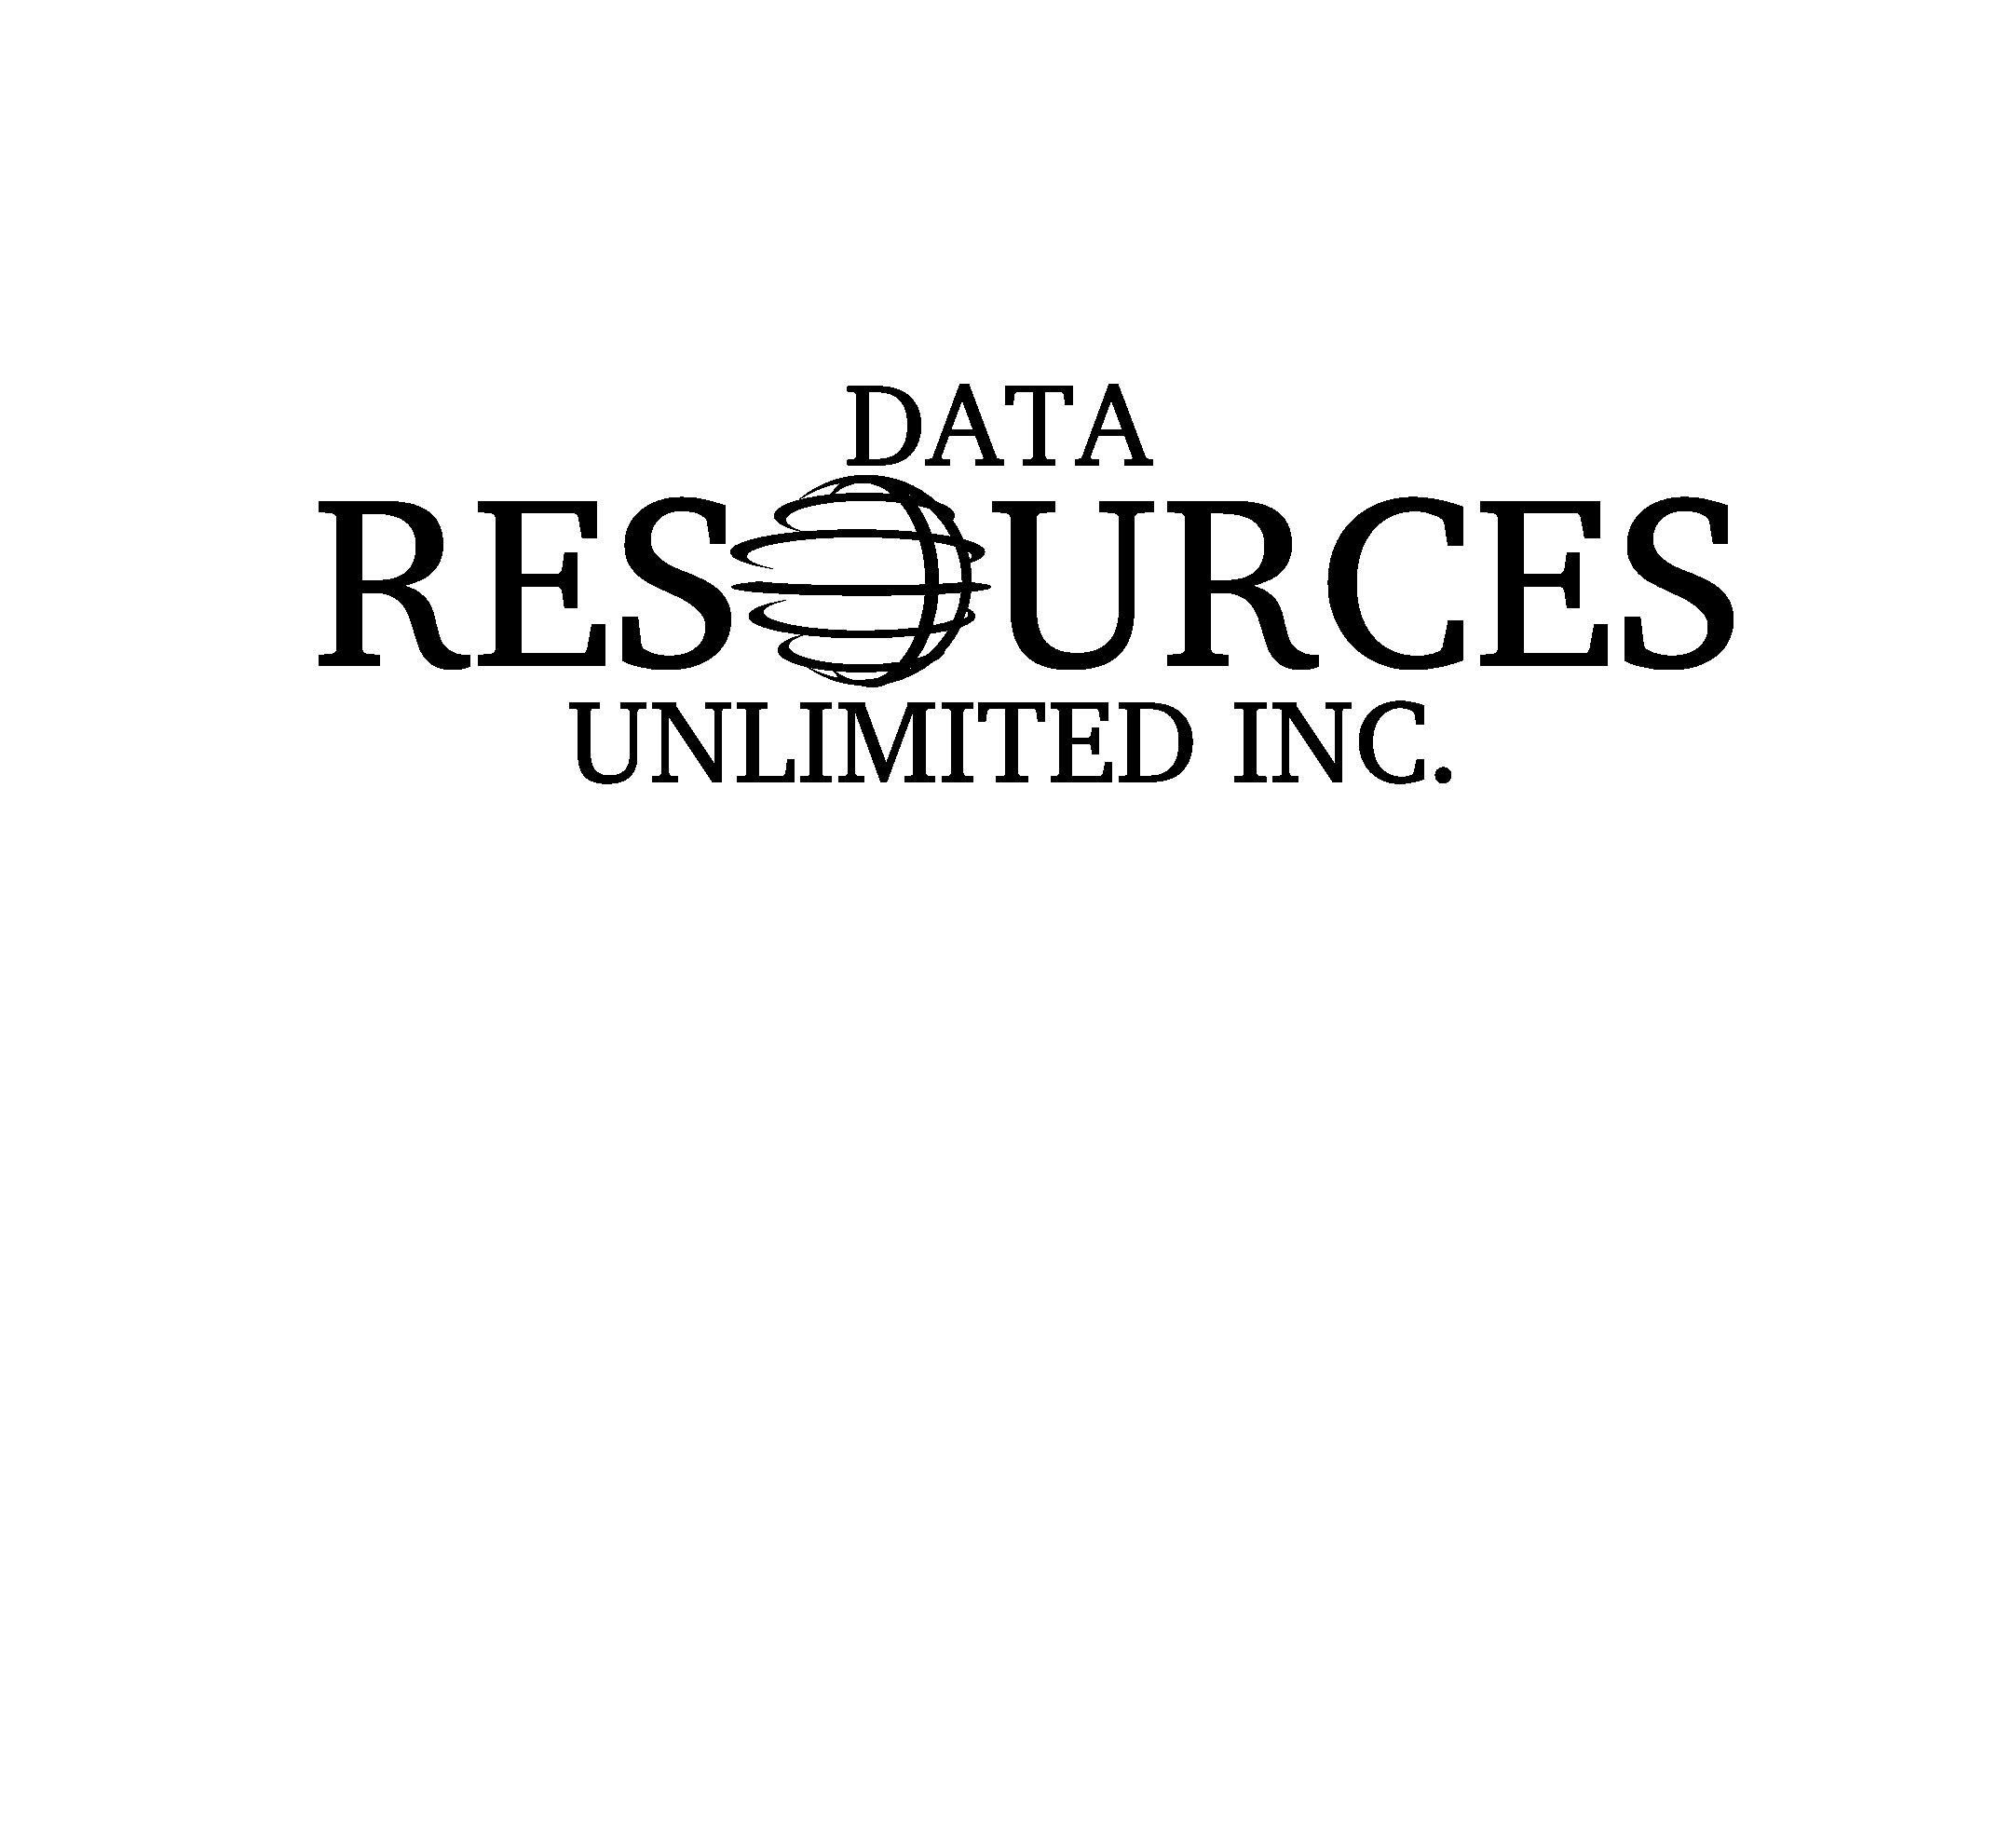 Data Resources Unlimited